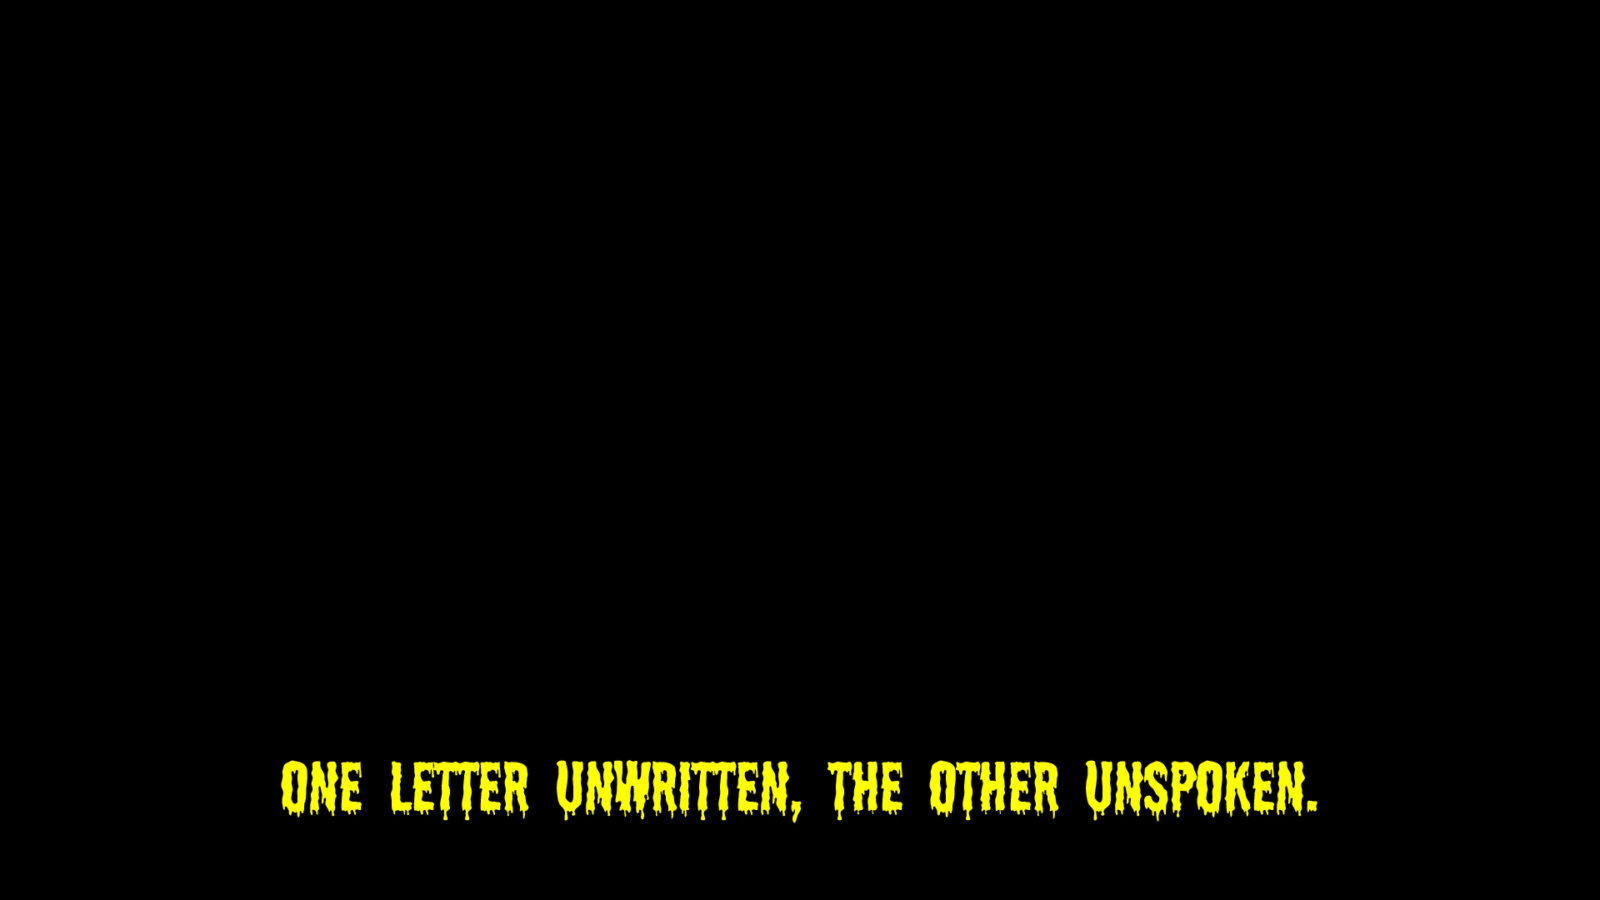 Raymond Boisjoly, Notes on Two Letters: 1958/1965 (still), 2011, HD video projection, 4 minutes, 33 seconds